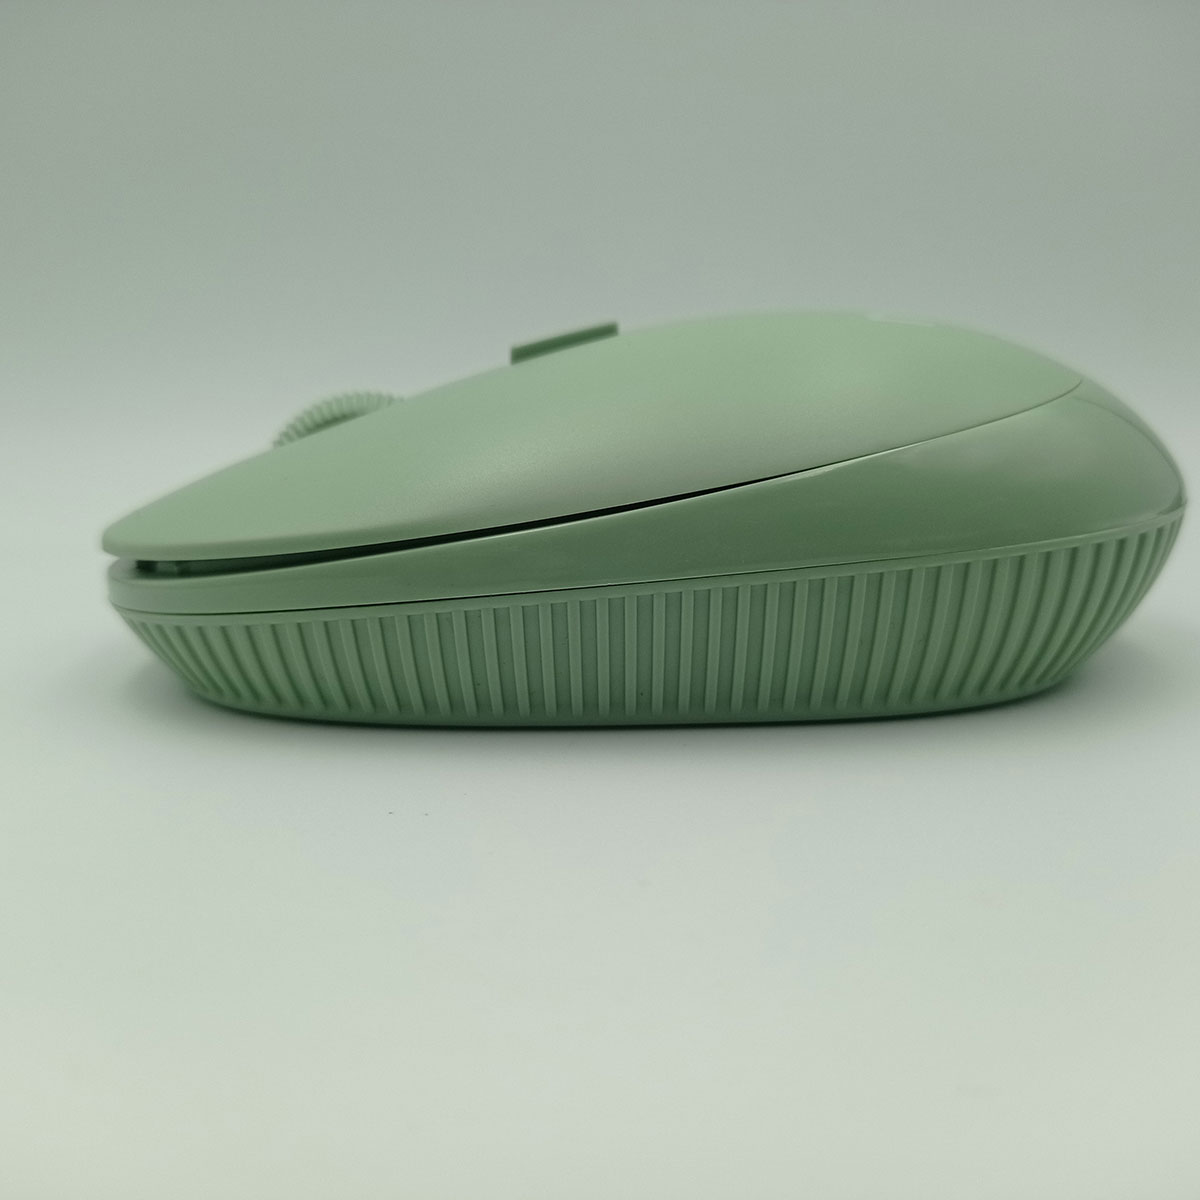 nm71-wireless-mouse-green-03